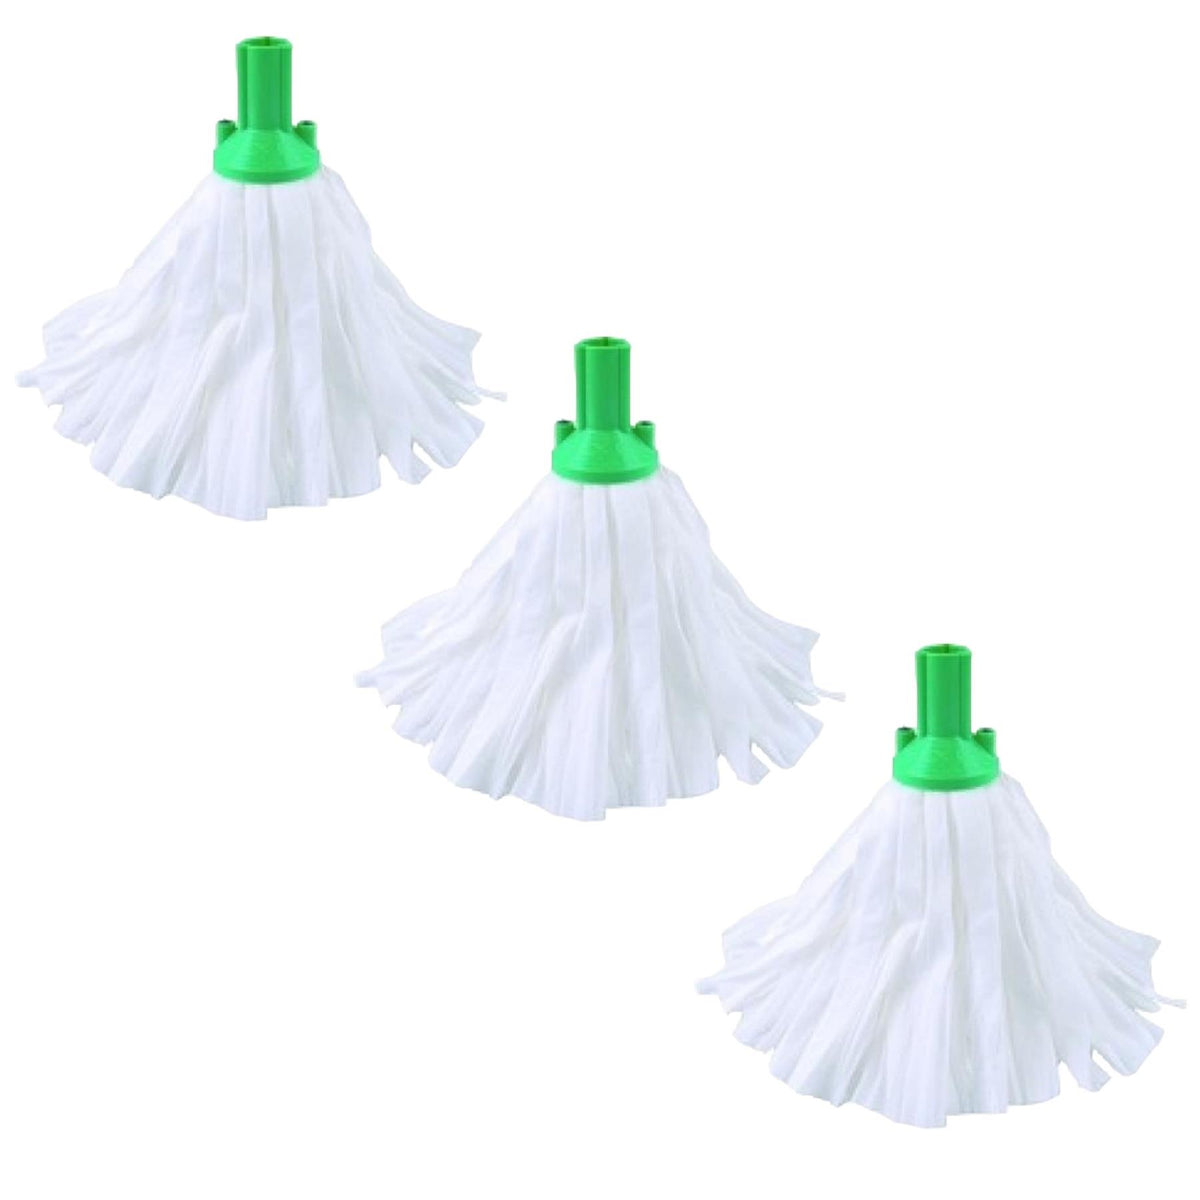 Exel Disposable Mop Heads 117 Grams Pack of 3 Green